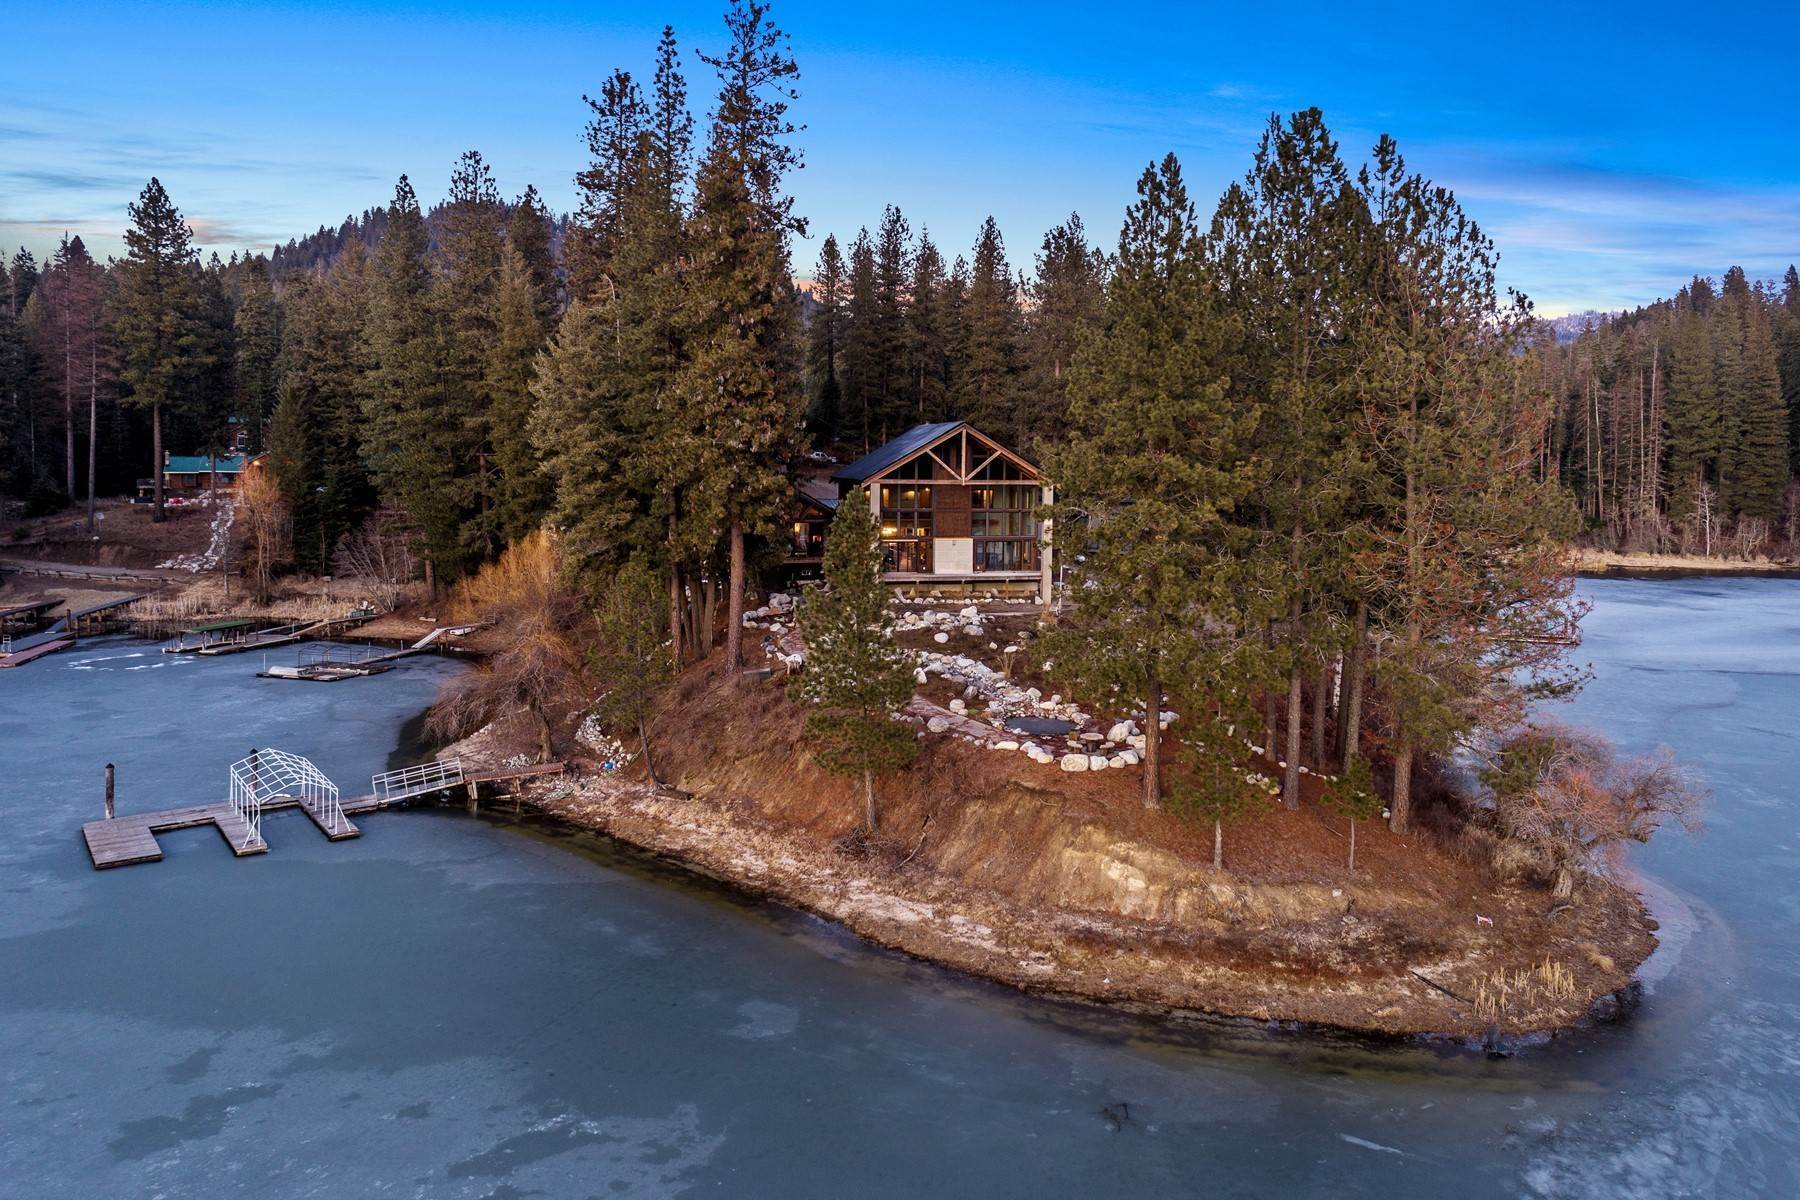 Single Family Homes for Sale at Hayden Lake Rustic Luxury Waterfront 14318 N Waters Edge Ct Hayden, Idaho 83835 United States